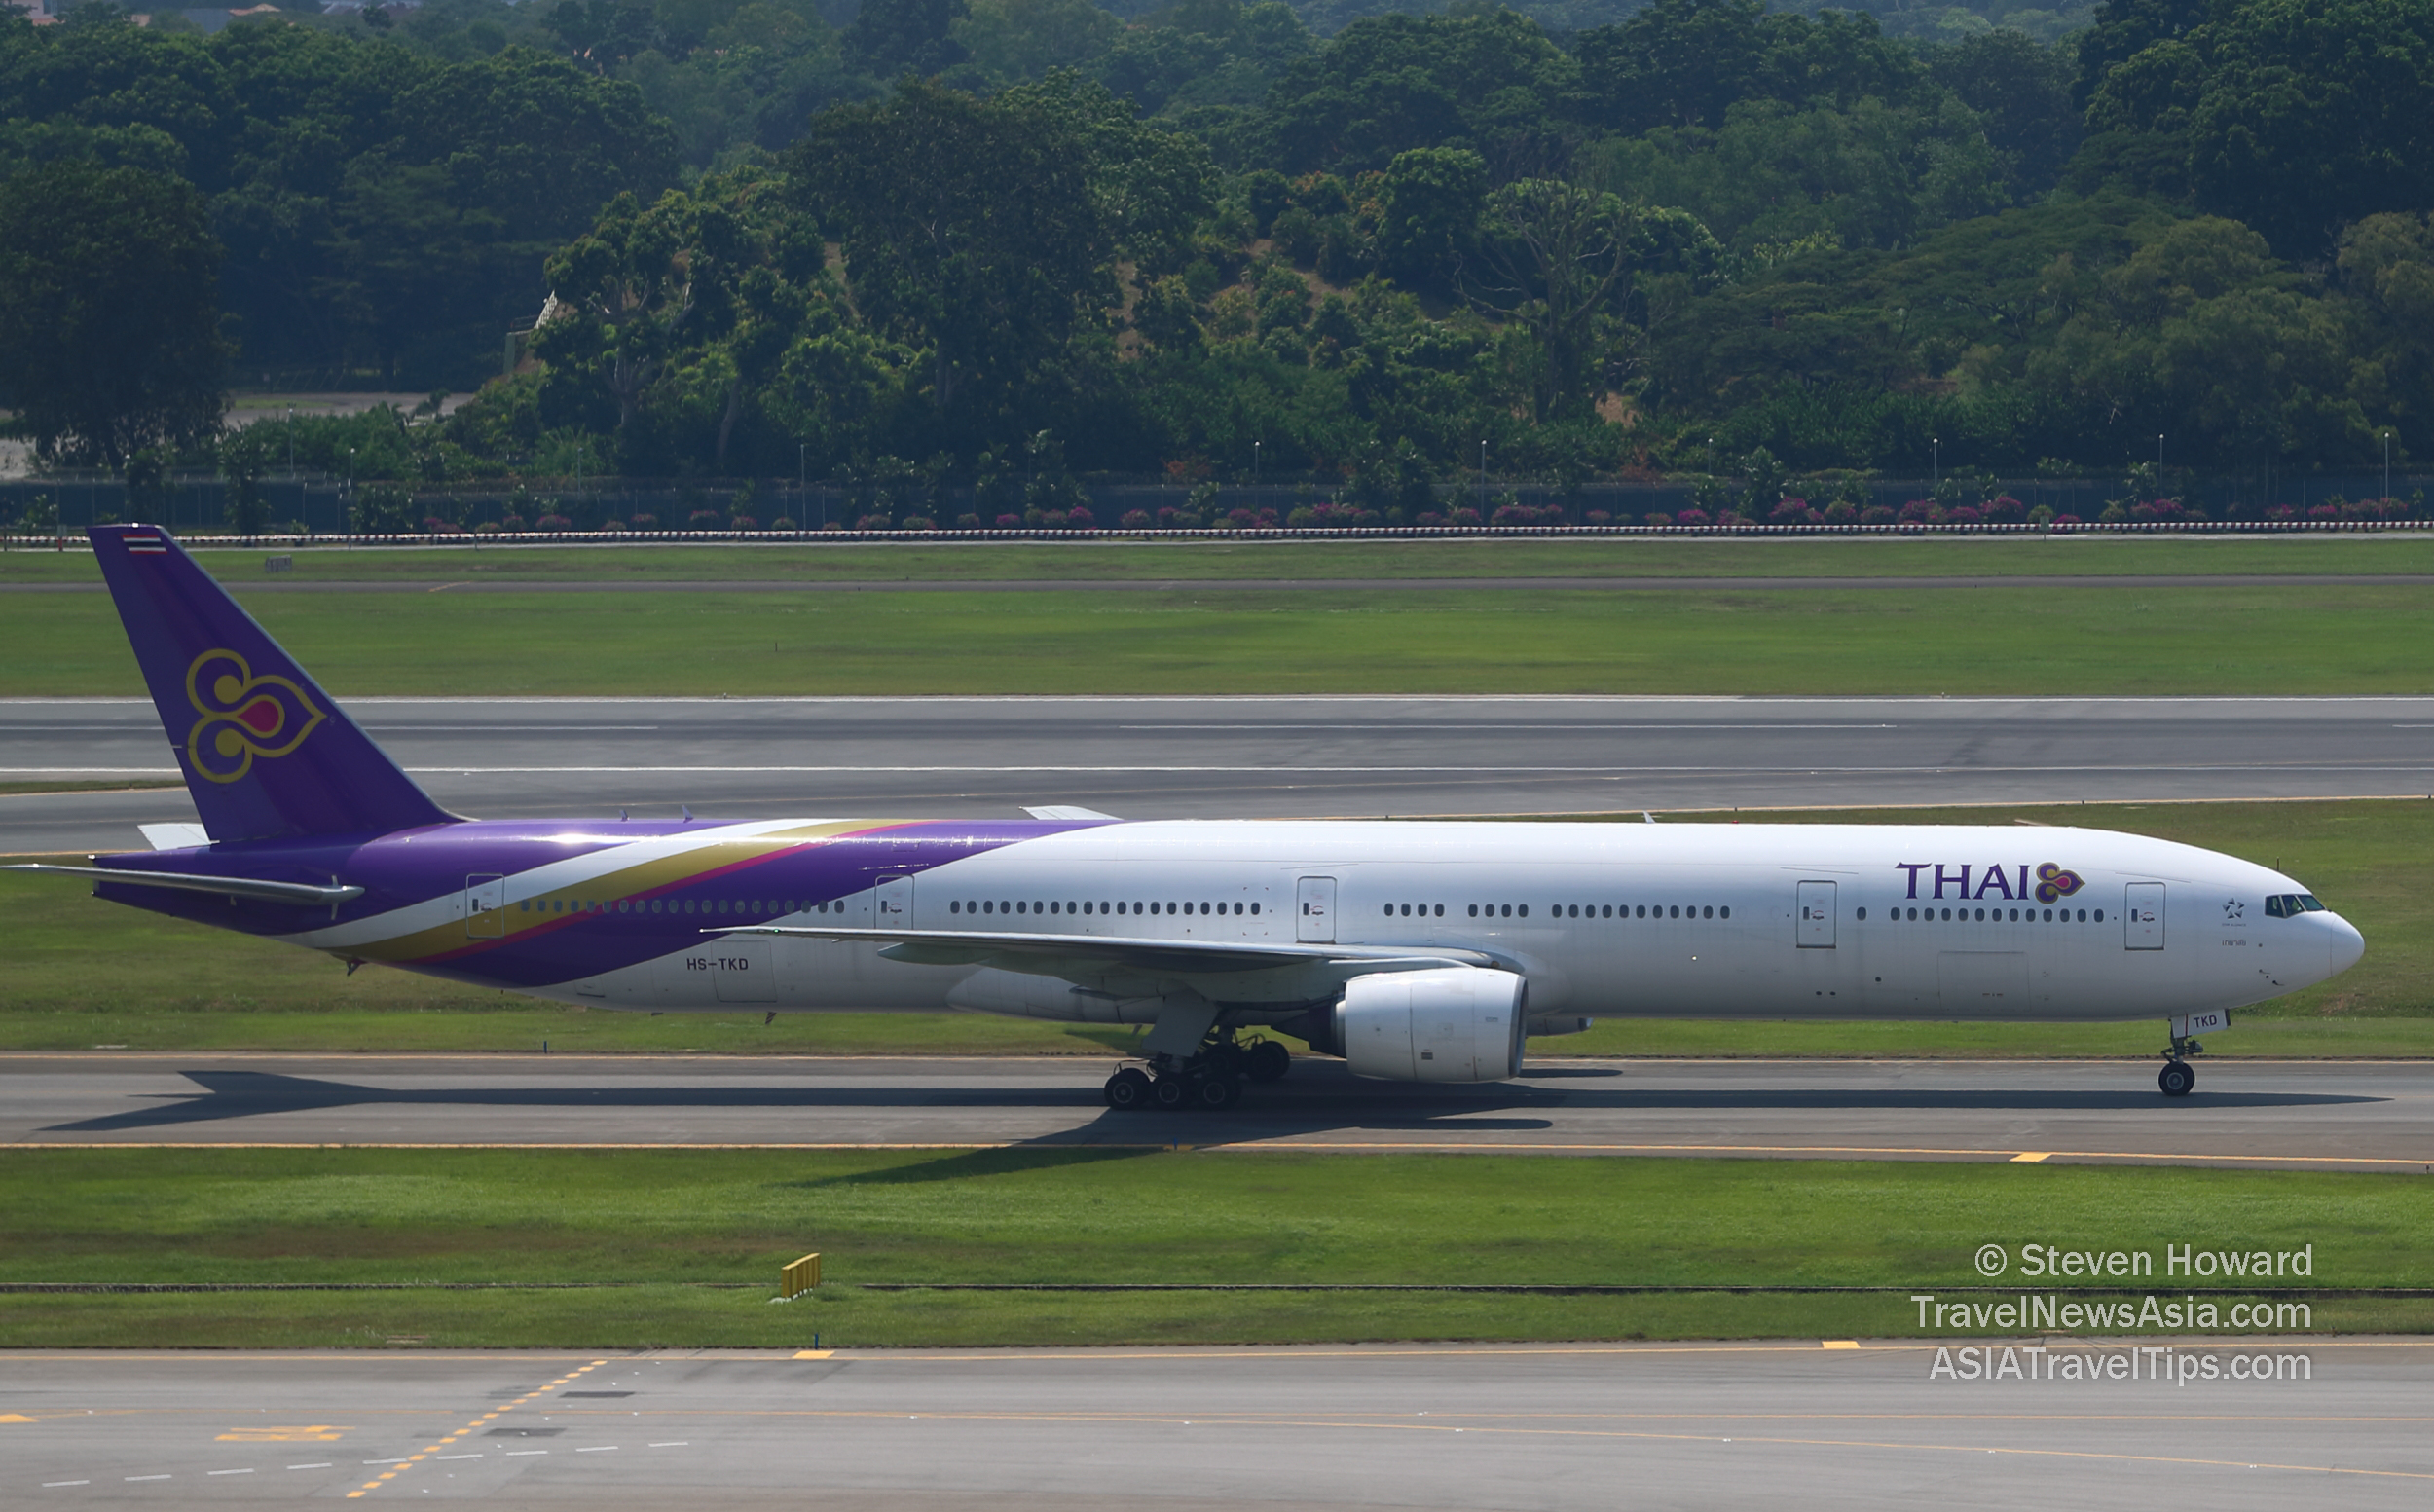 Thai Airways Boeing 777-300 reg HS-TKD. Picture by Steven Howard of TravelNewsAsia.com Click to enlarge.